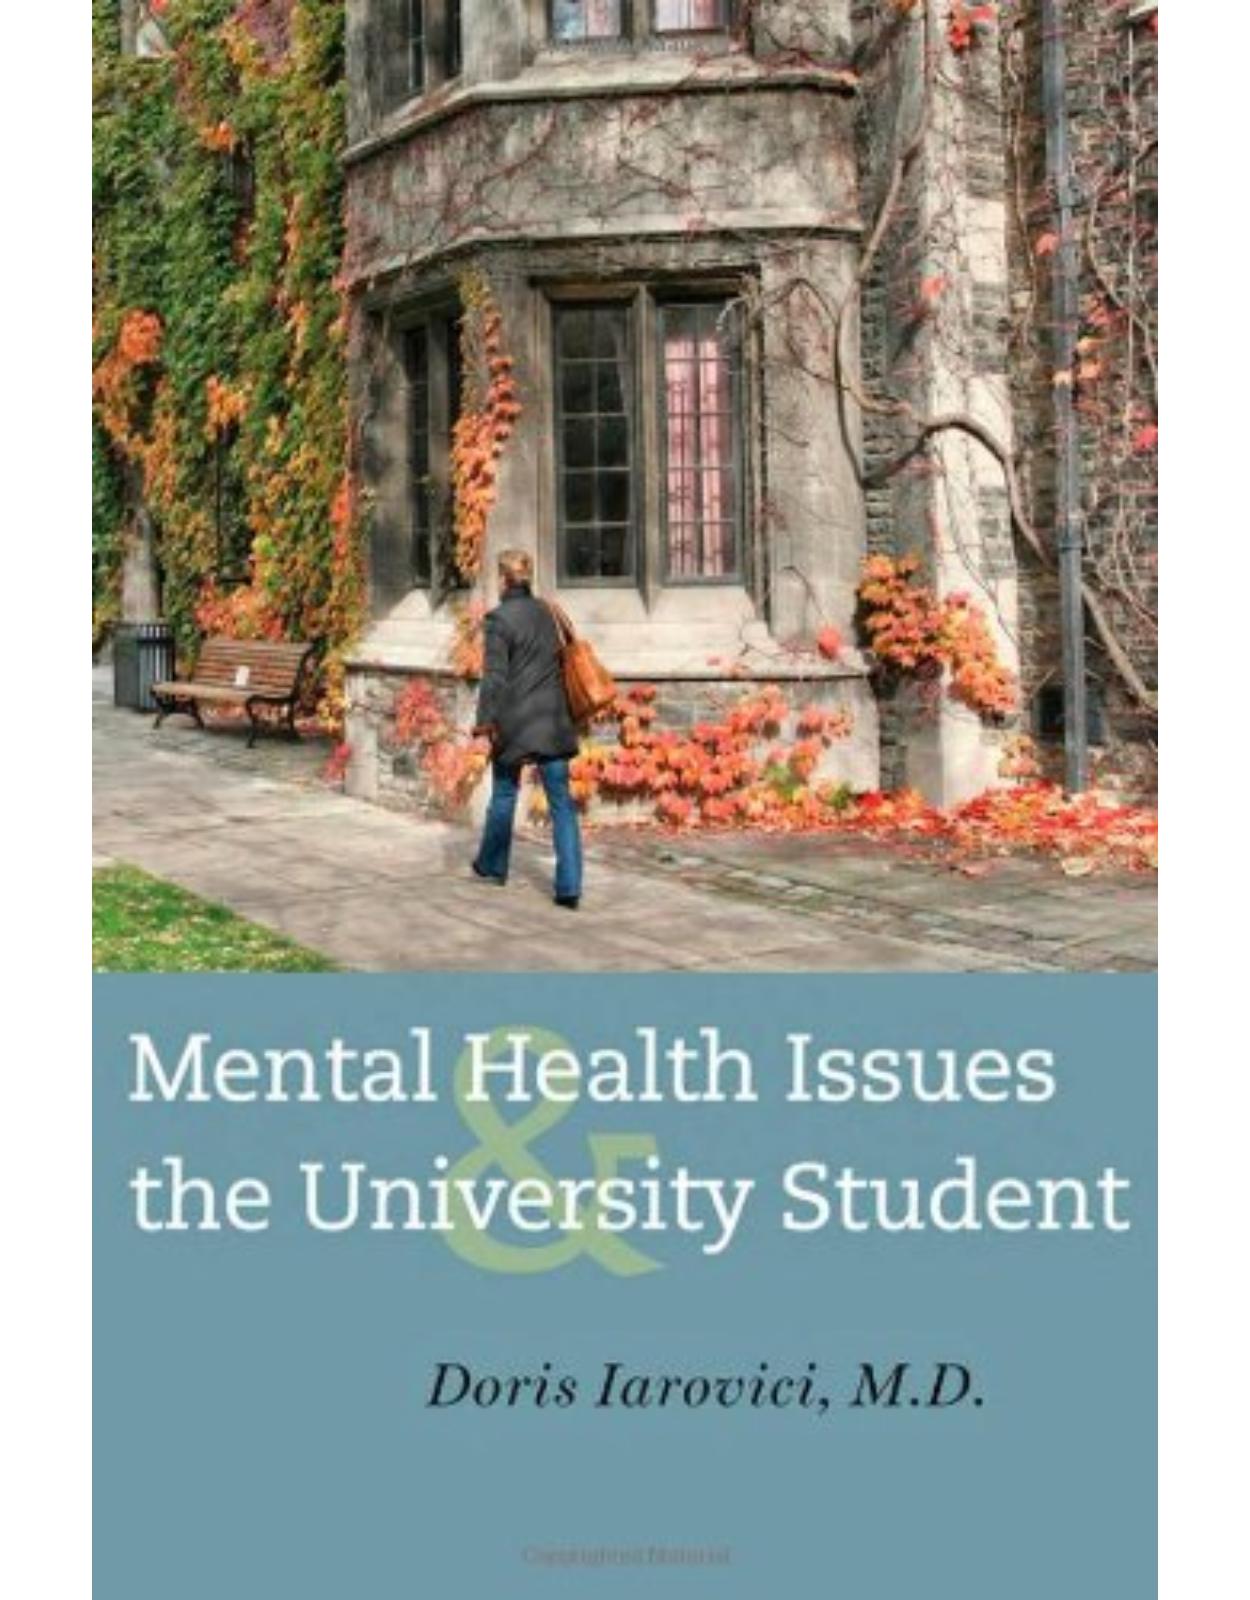 Mental Health Issues and the University Student,